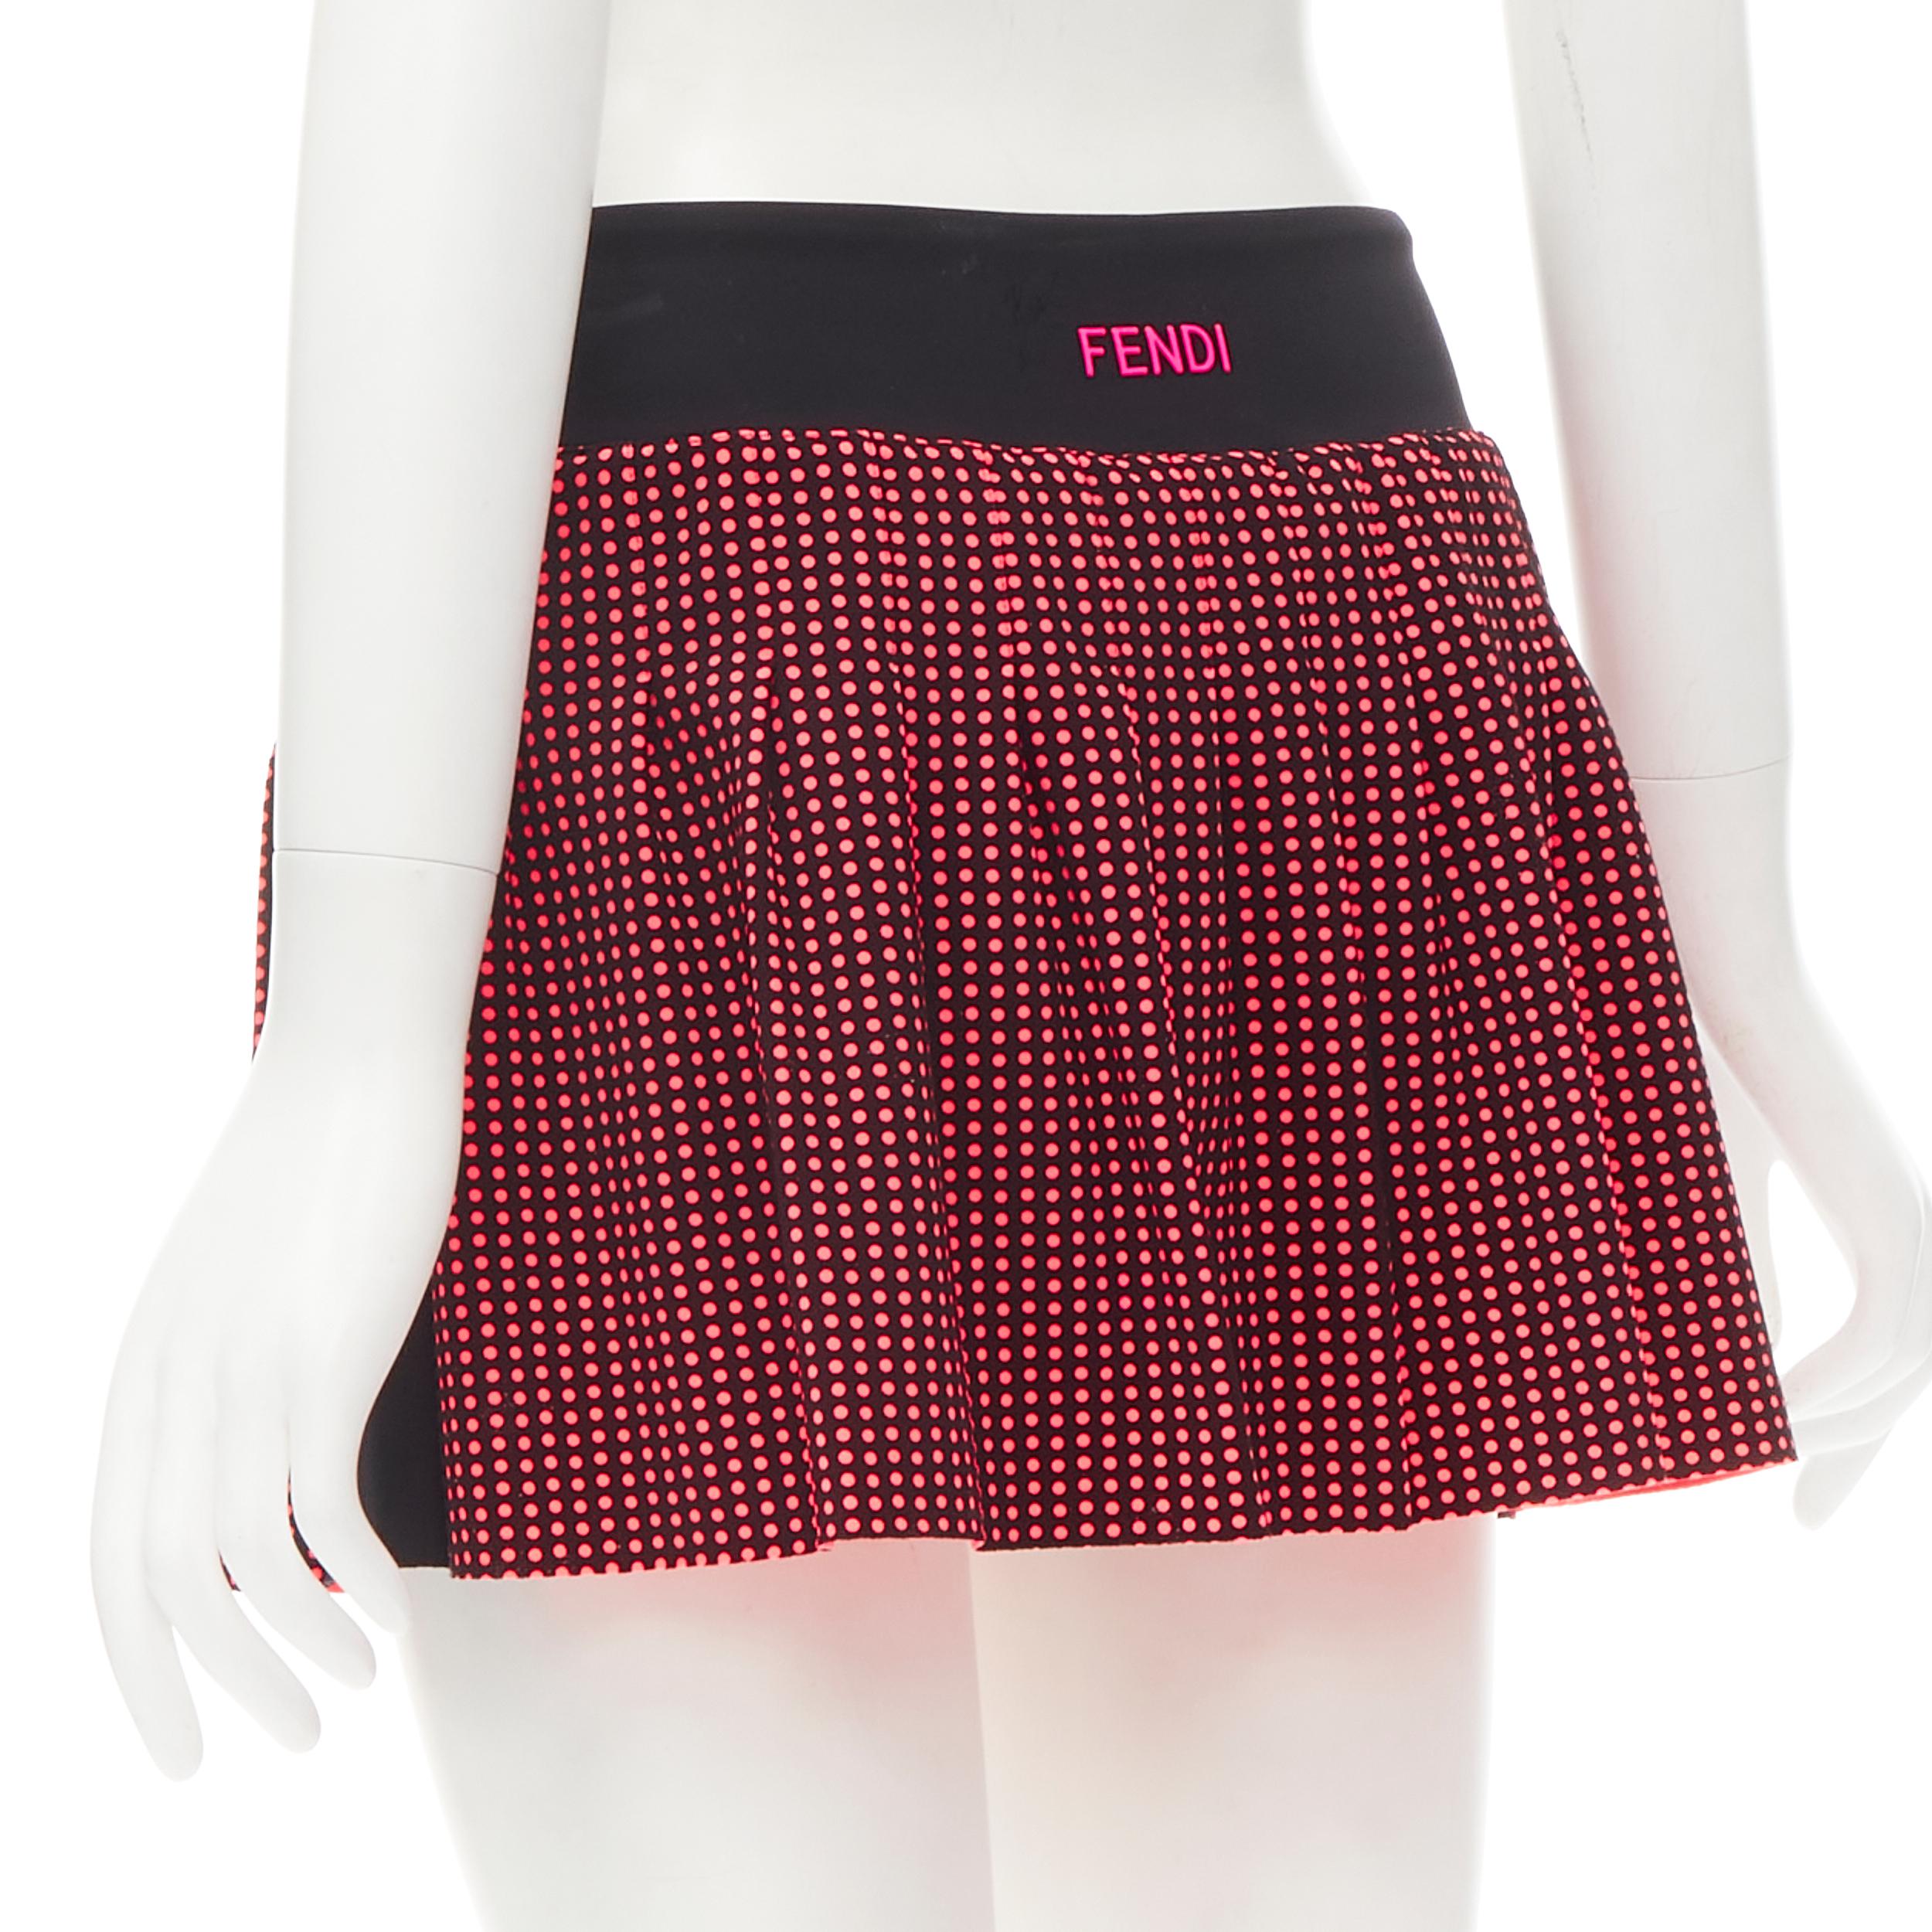 FENDI Activewear Karl Love black pink polka dot lined pleated skirt S In Excellent Condition For Sale In Hong Kong, NT